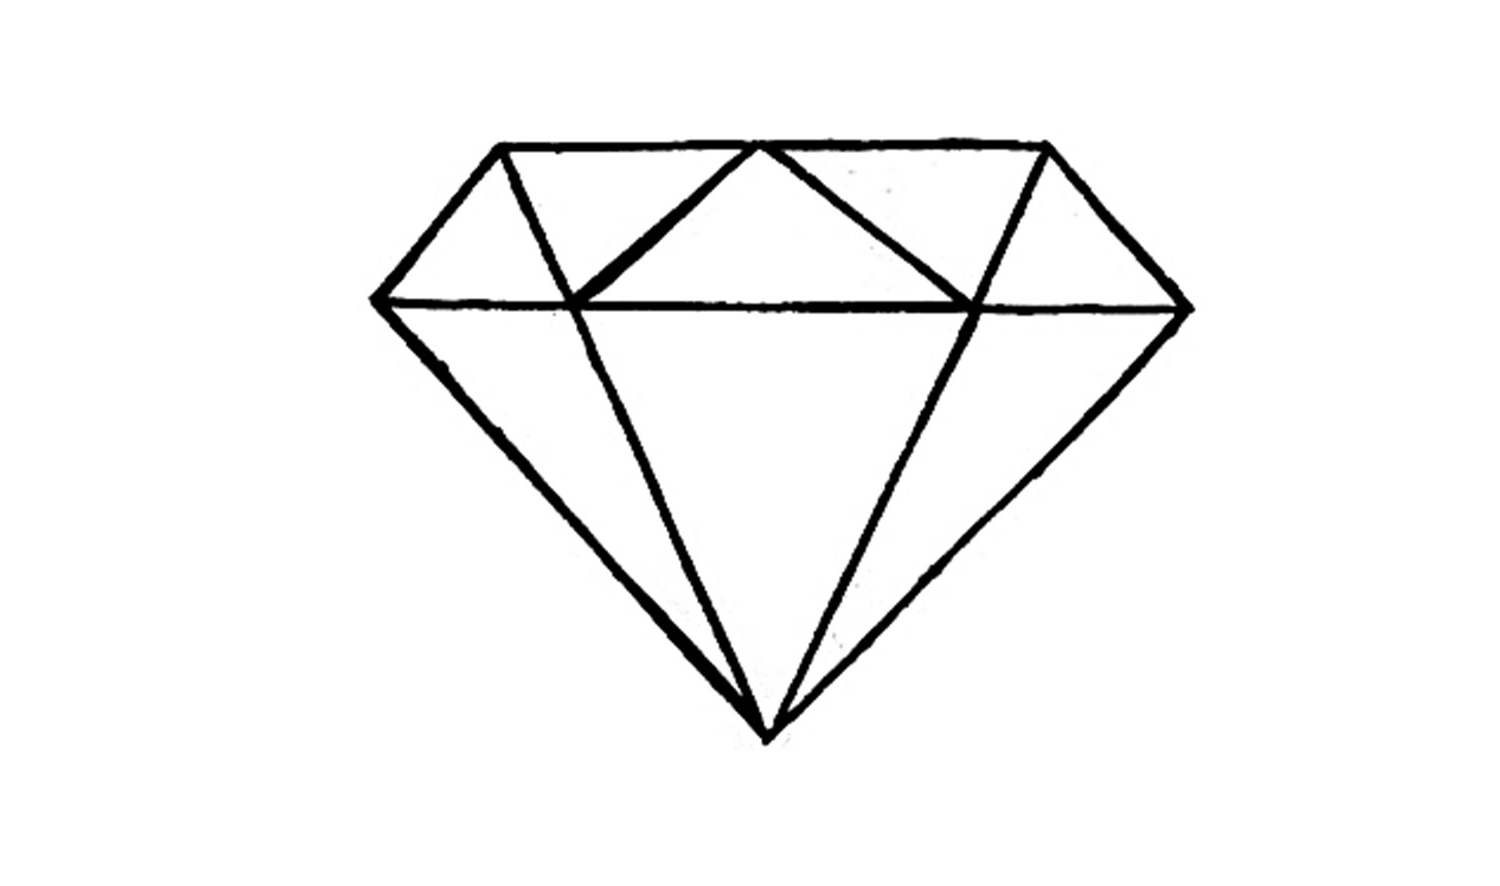 Grunge Diamond Icon Isolated On White Background, Grunge Drawing, Diamond  Drawing, Grunge Sketch PNG and Vector with Transparent Background for Free  Download